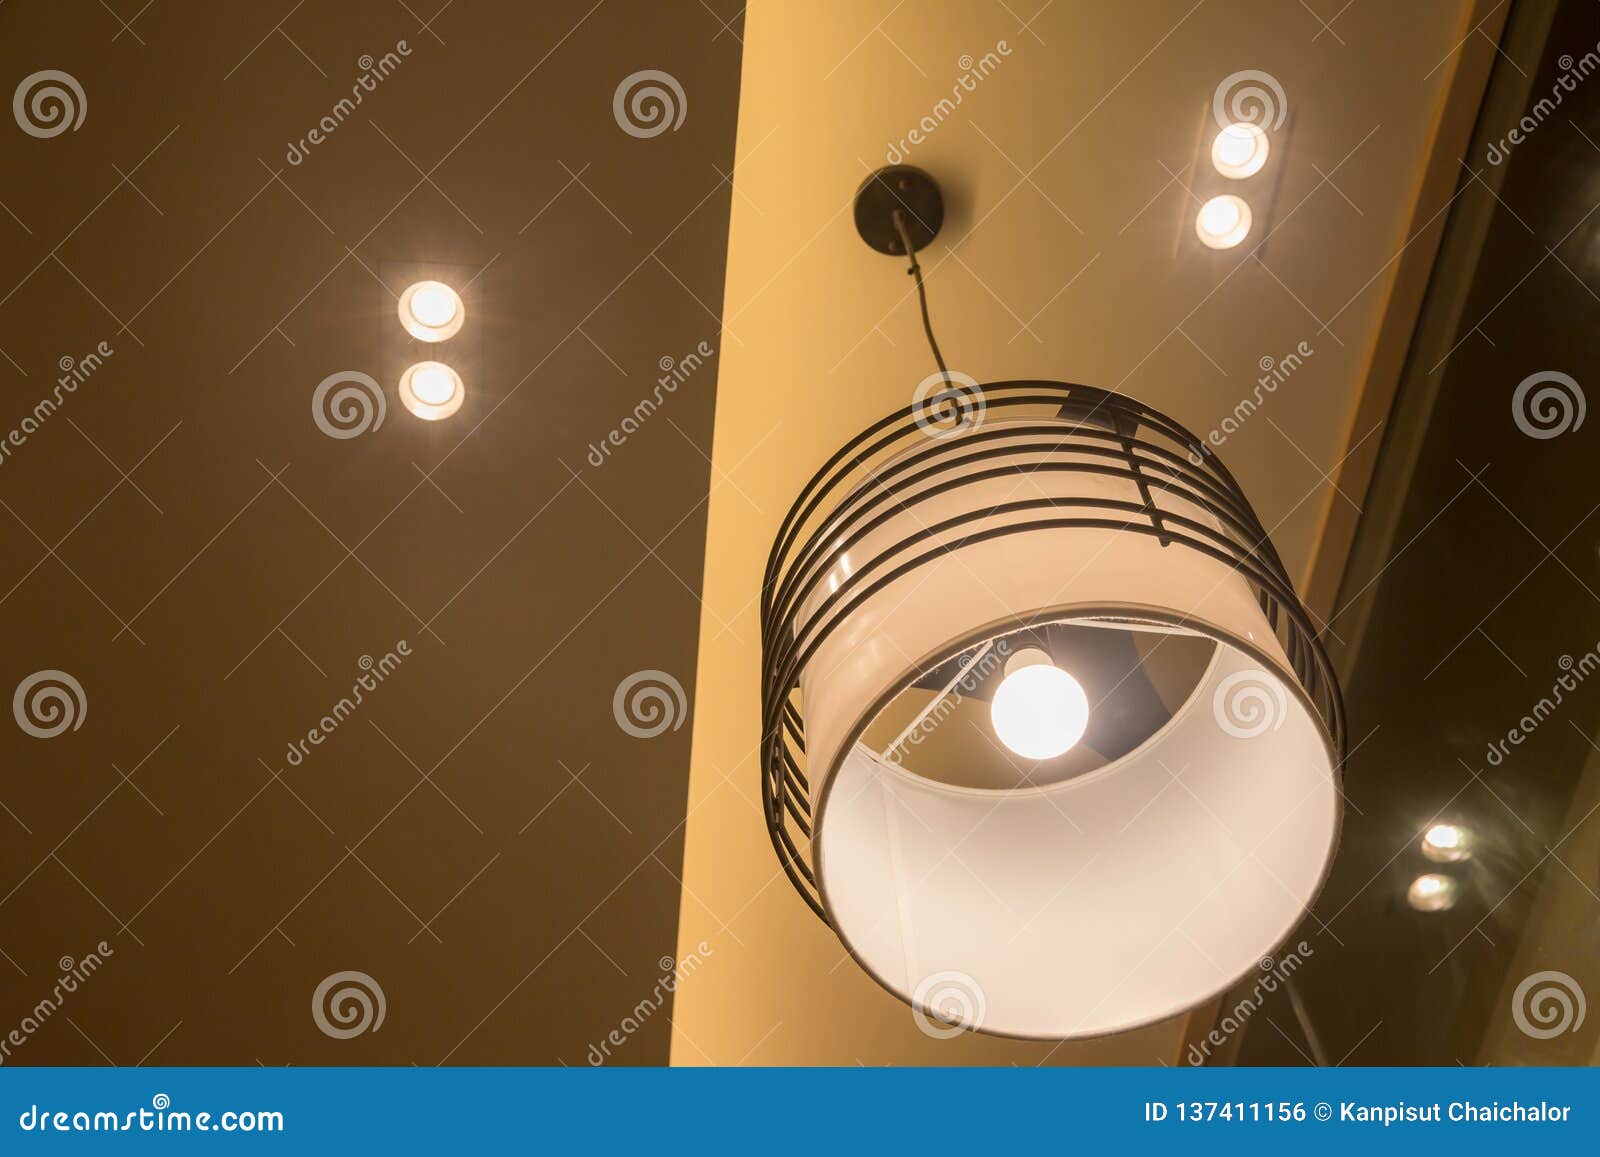 Ceiling Lamp Interior Lighting Symmetry A Group Of Hanging